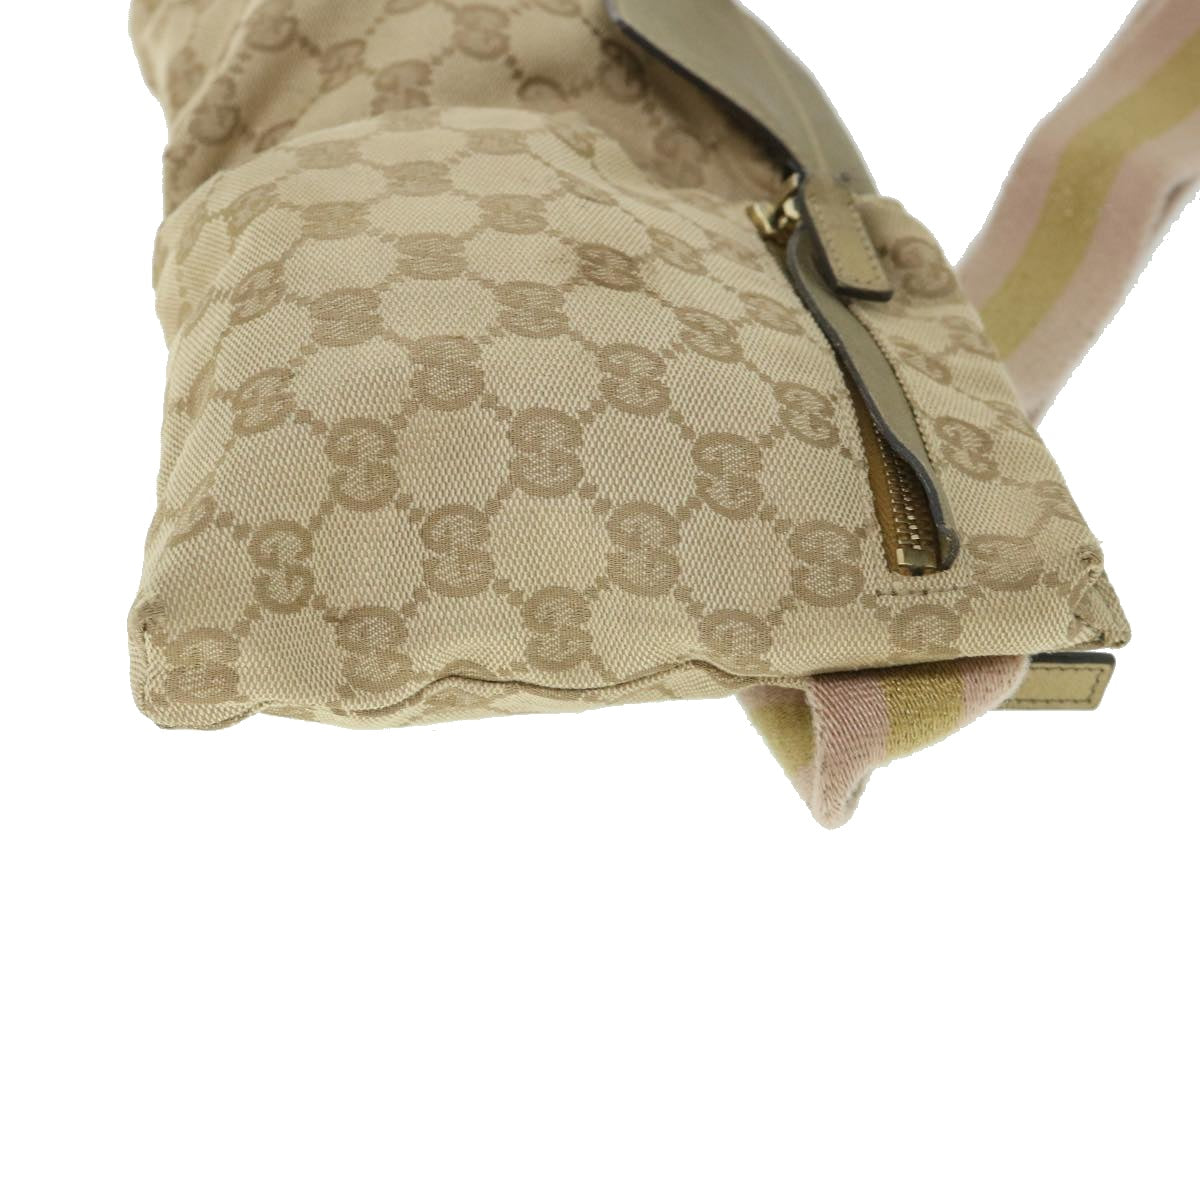 GUCCI GG Canvas Sherry Line Waist bag Beige Gold pink 28566 Auth ep1738